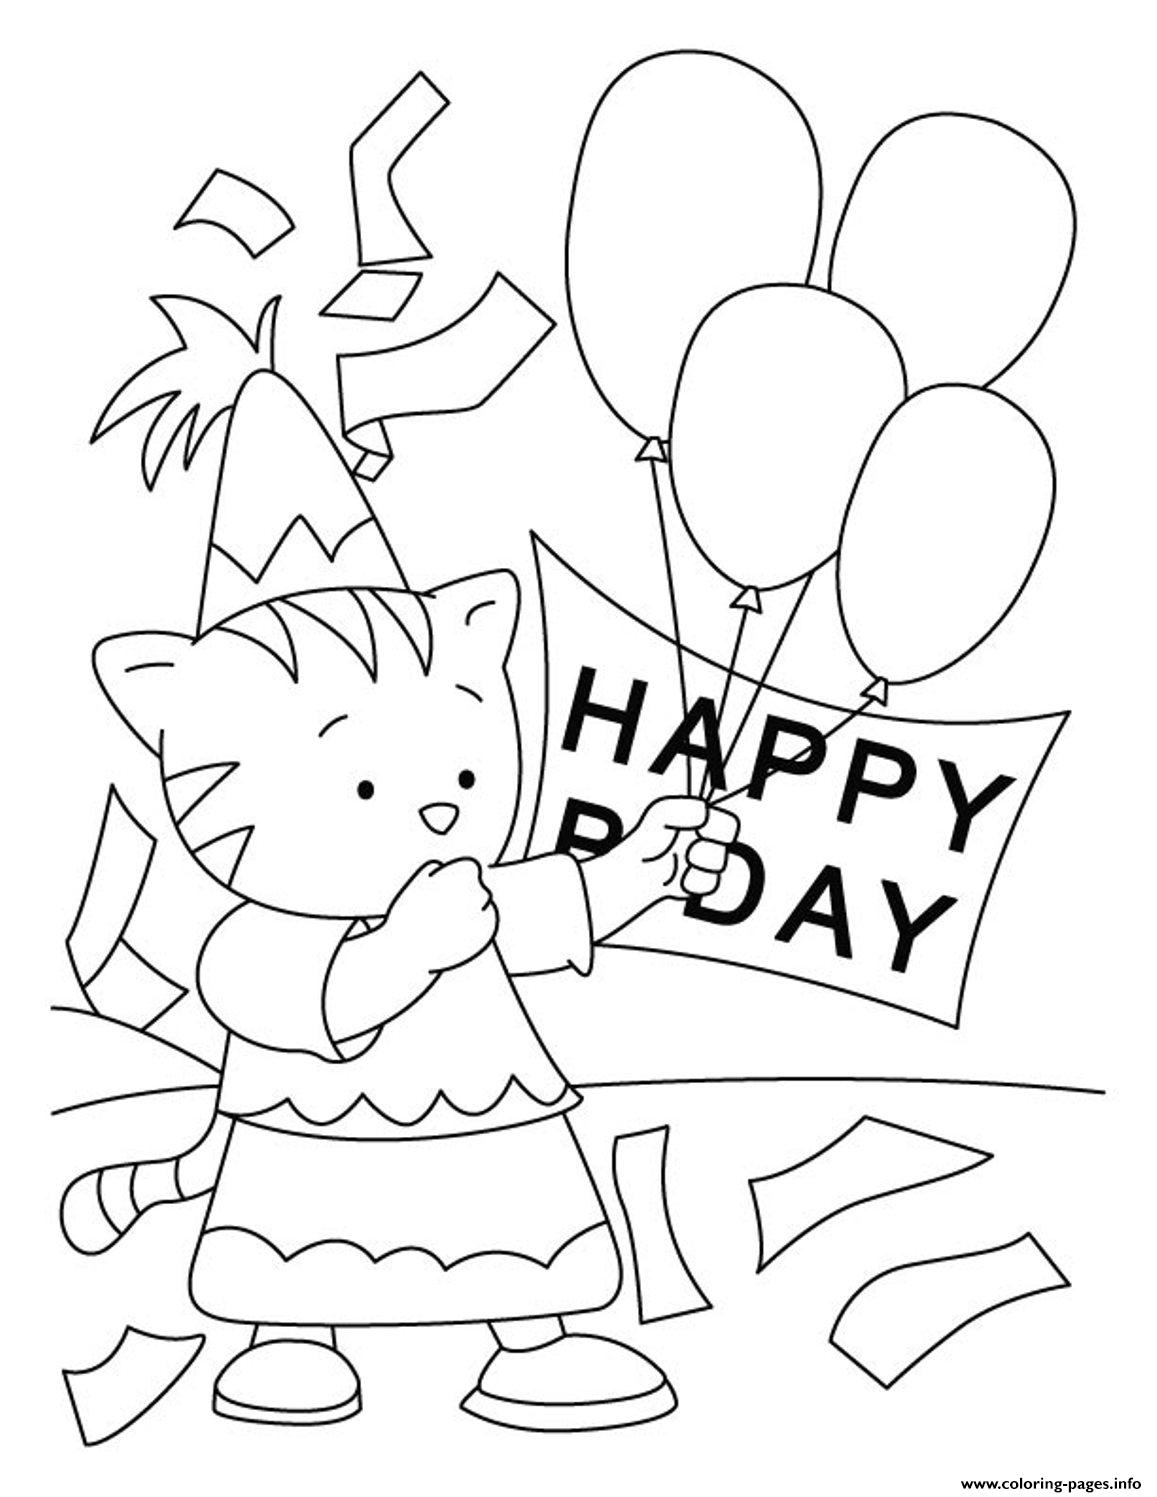 Happy Birthday  For Kidsdd66 coloring